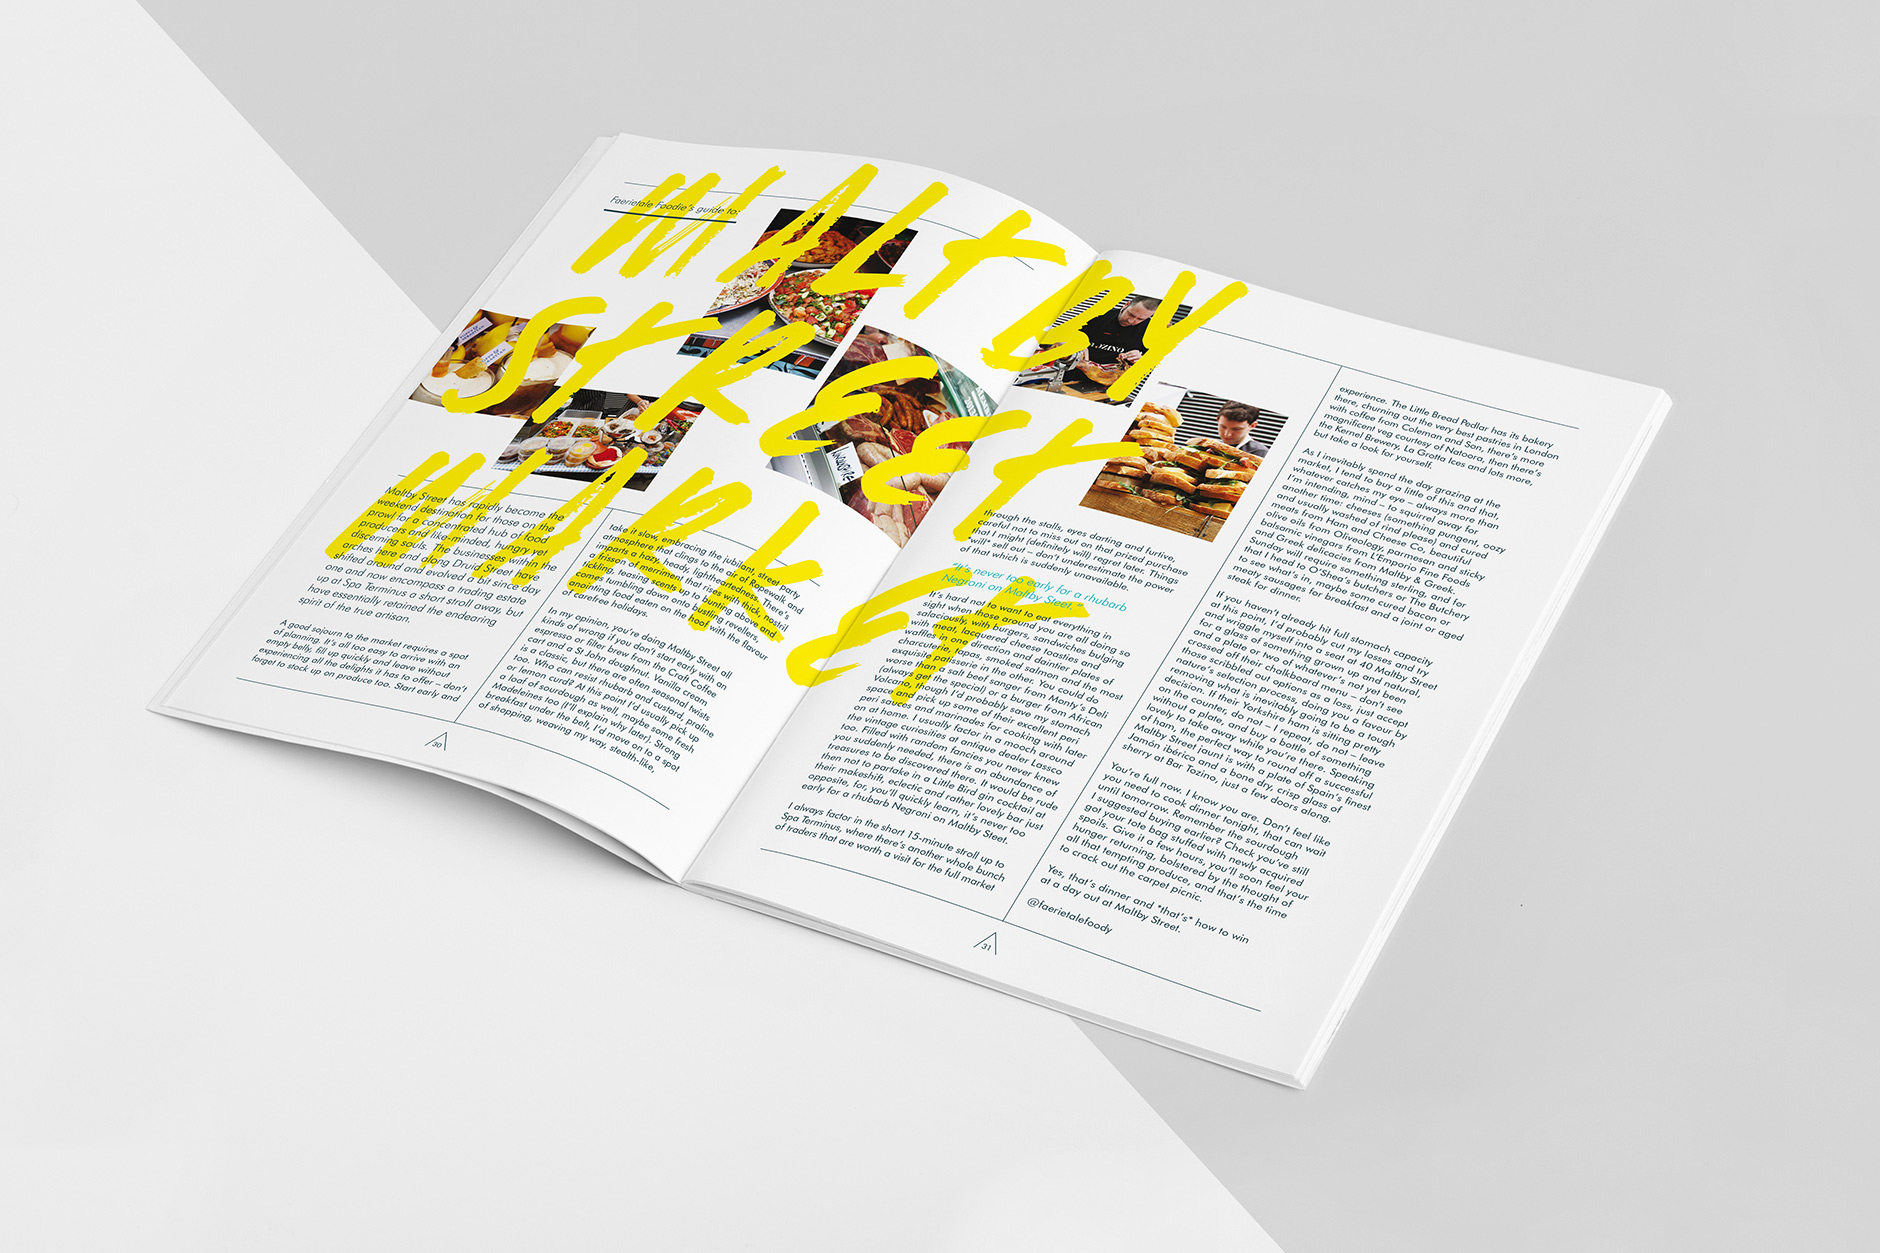 Cura newspaper by LimitedEditionDesign